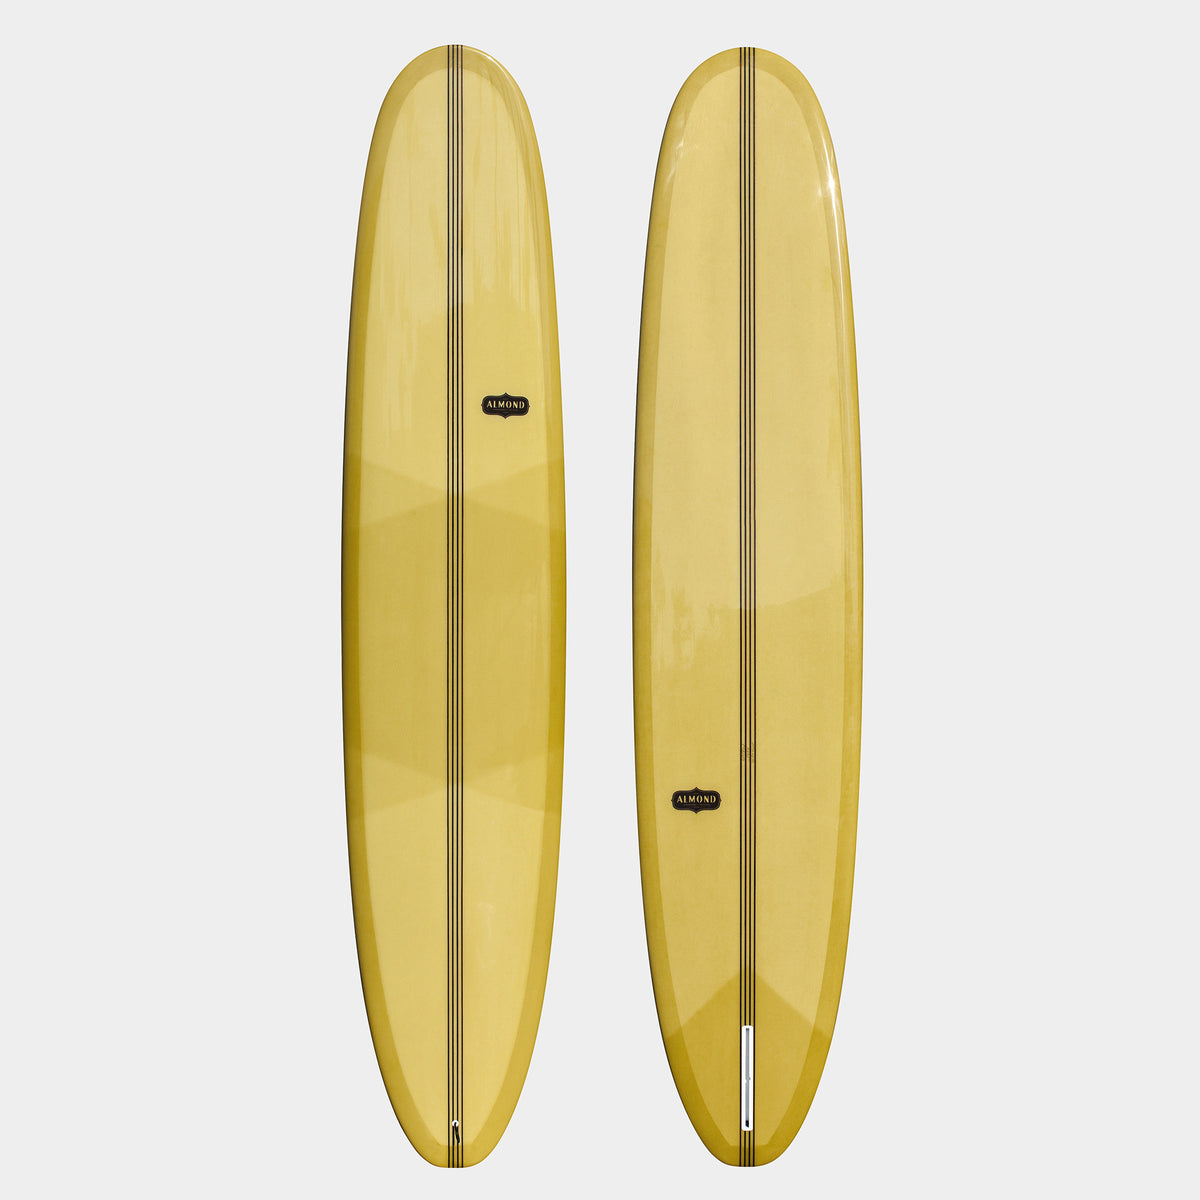 The Surf Thump Almond Surfboards Designs